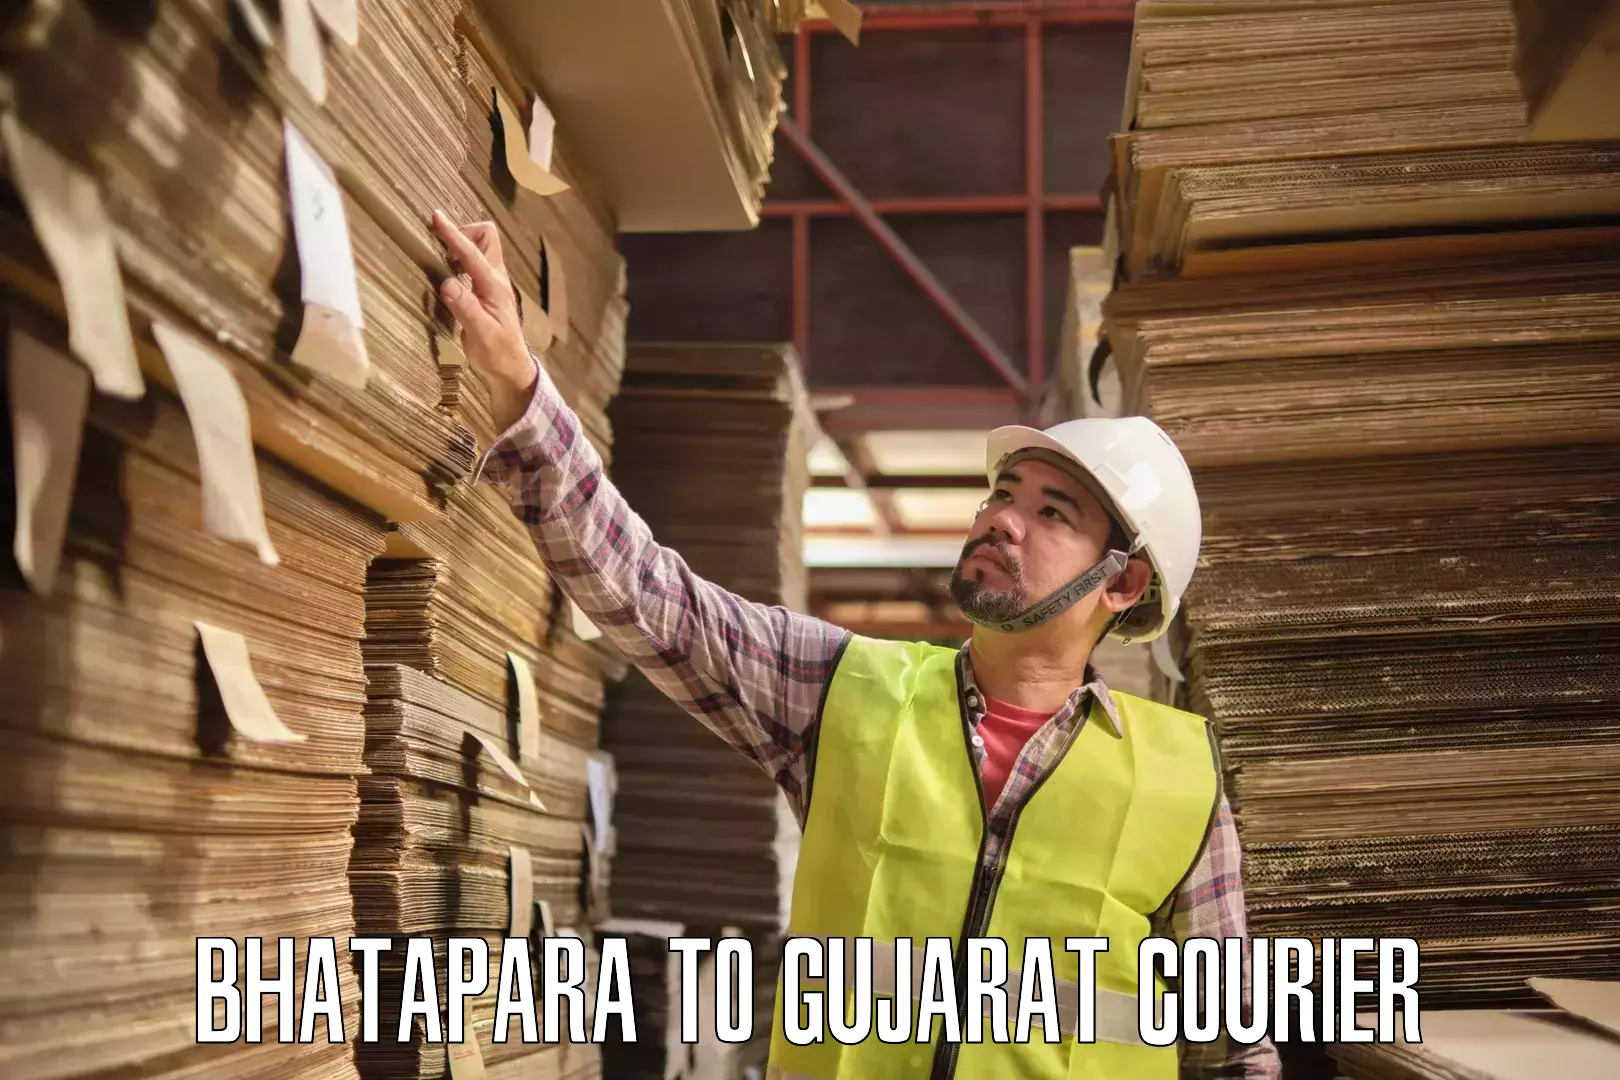 Sustainable courier practices Bhatapara to Surat